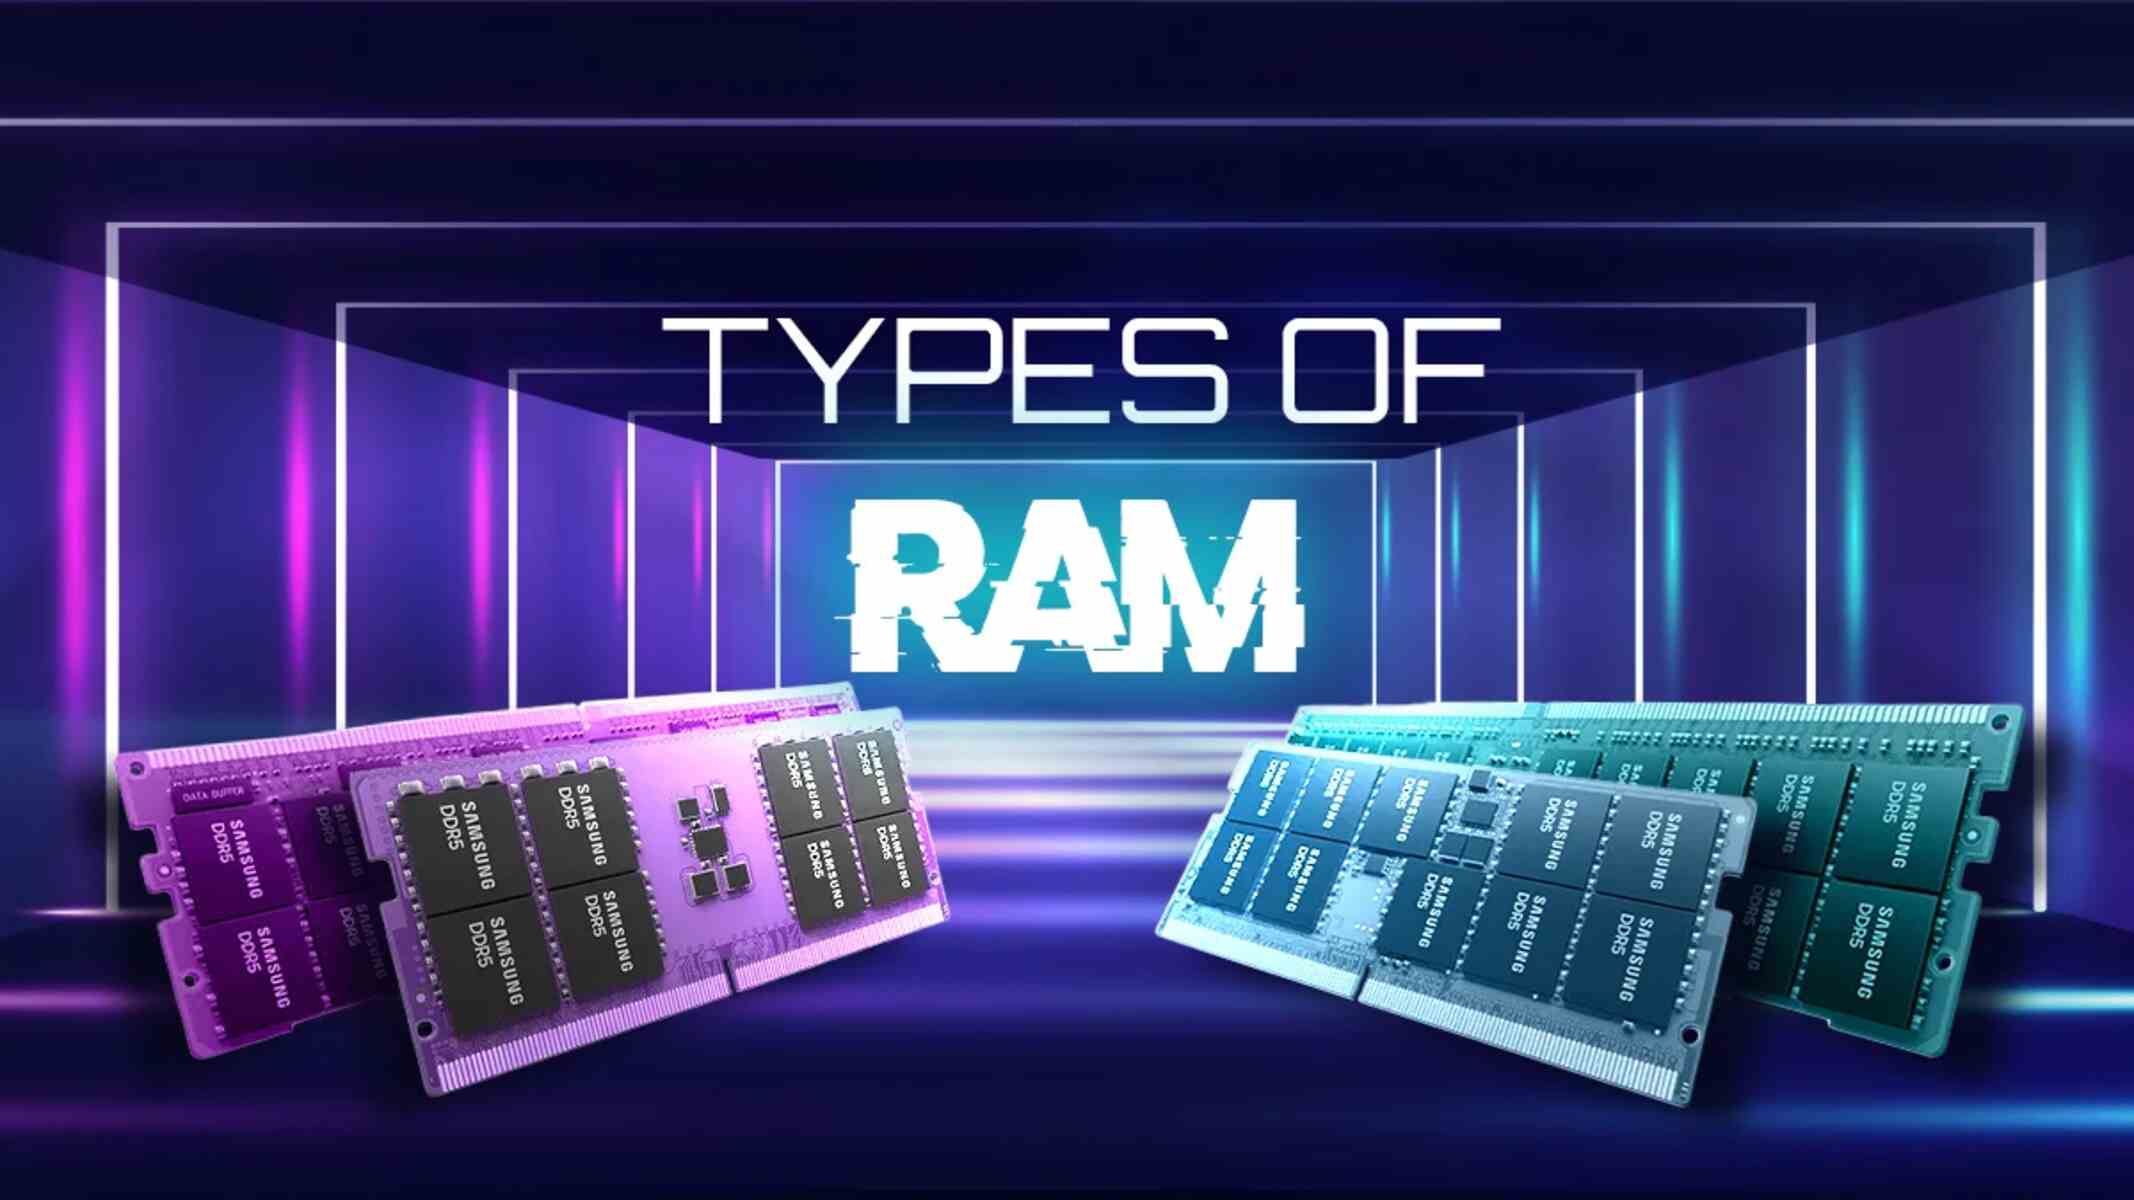 How Many Types Of RAM Are There